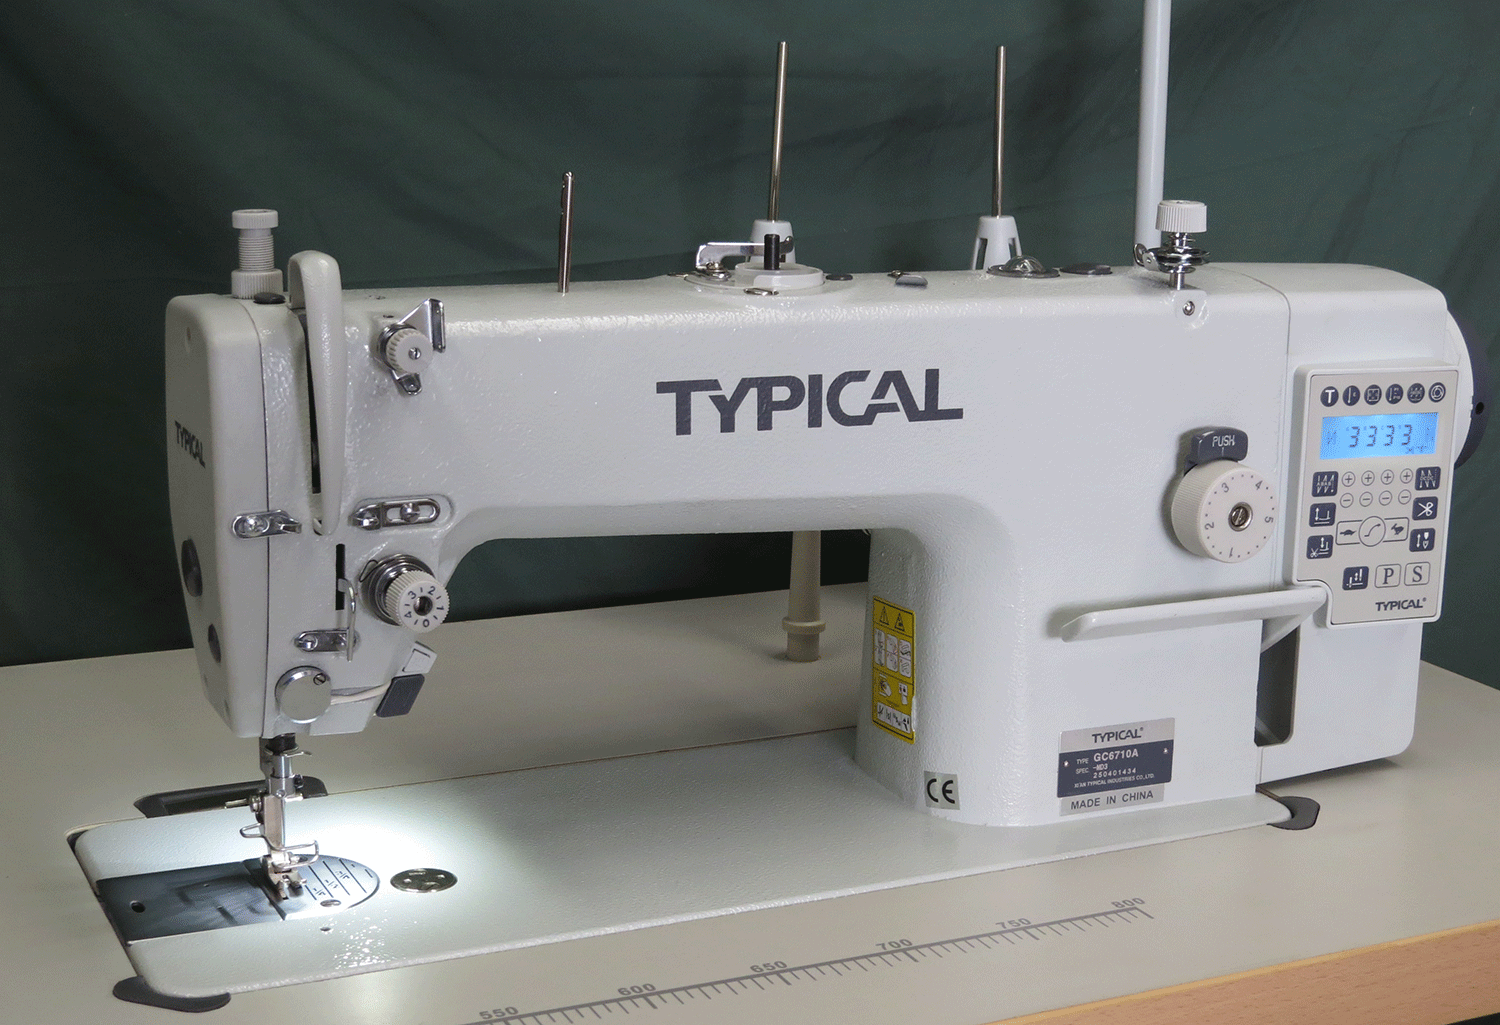 Typical fully automatic thread trim industrial sewing machine